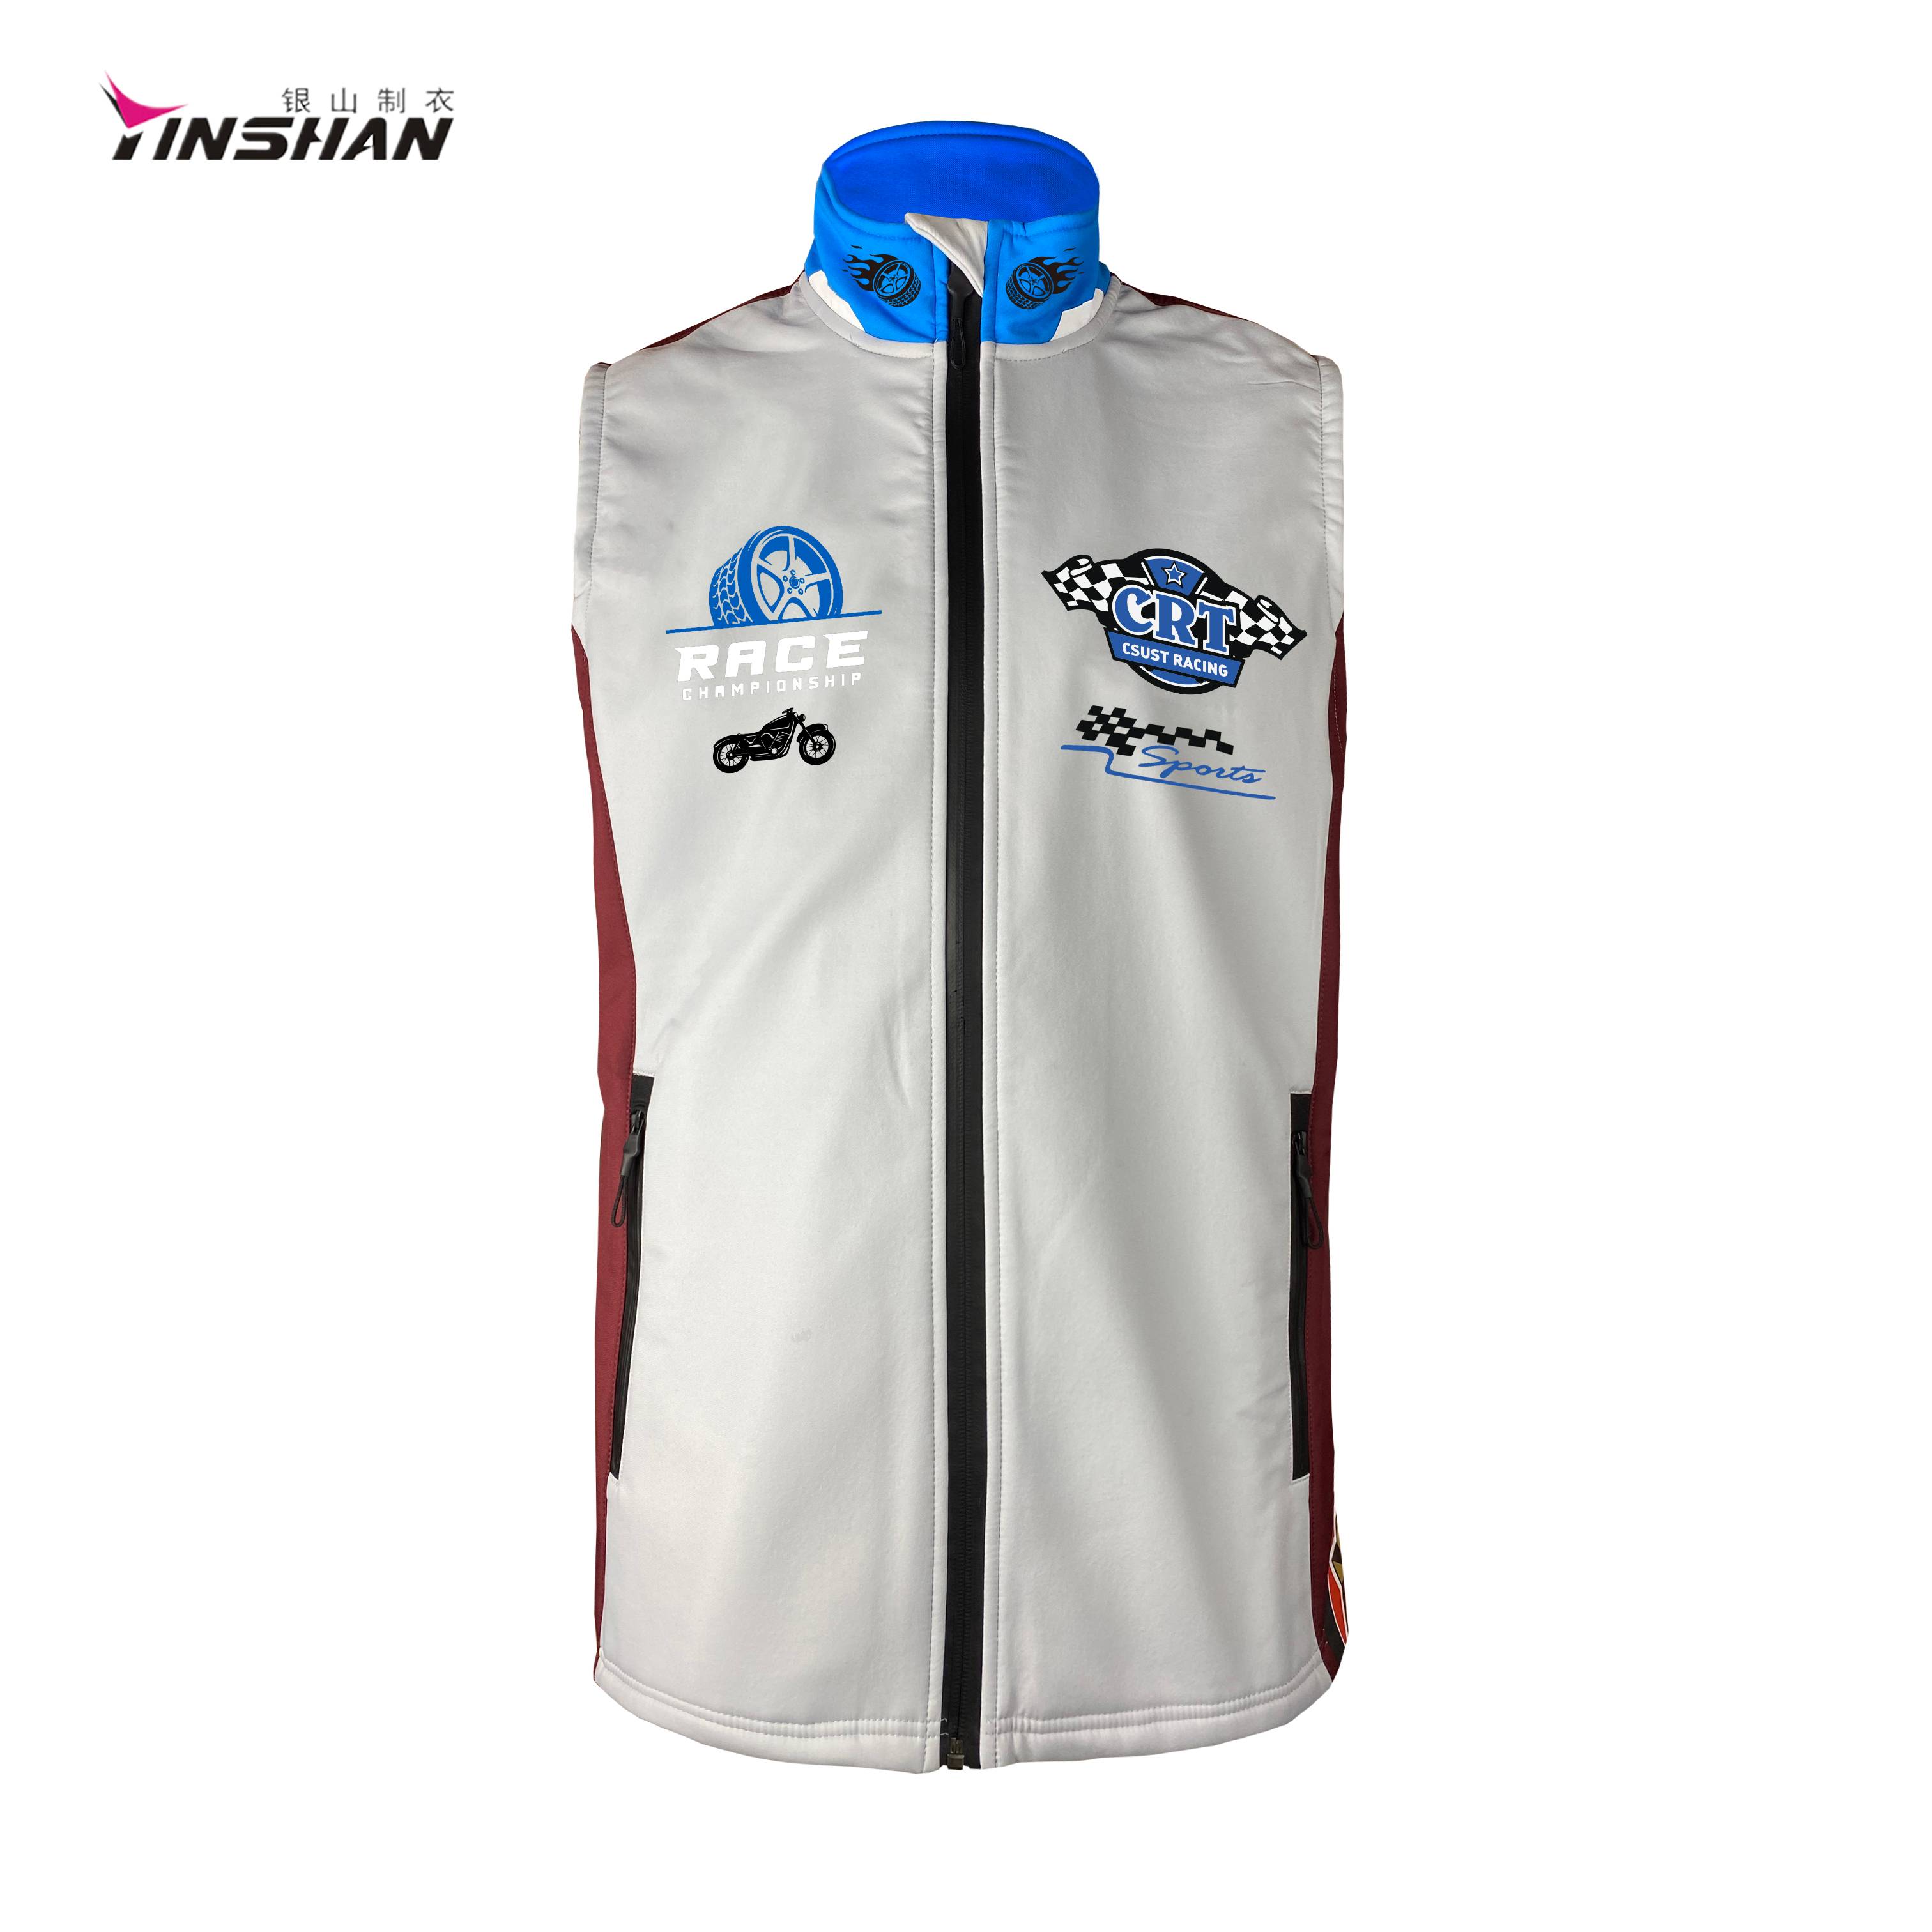 Customized Artwork Zipper Sports Vest with Embroidery and Printing For Horse Riding 1(1)